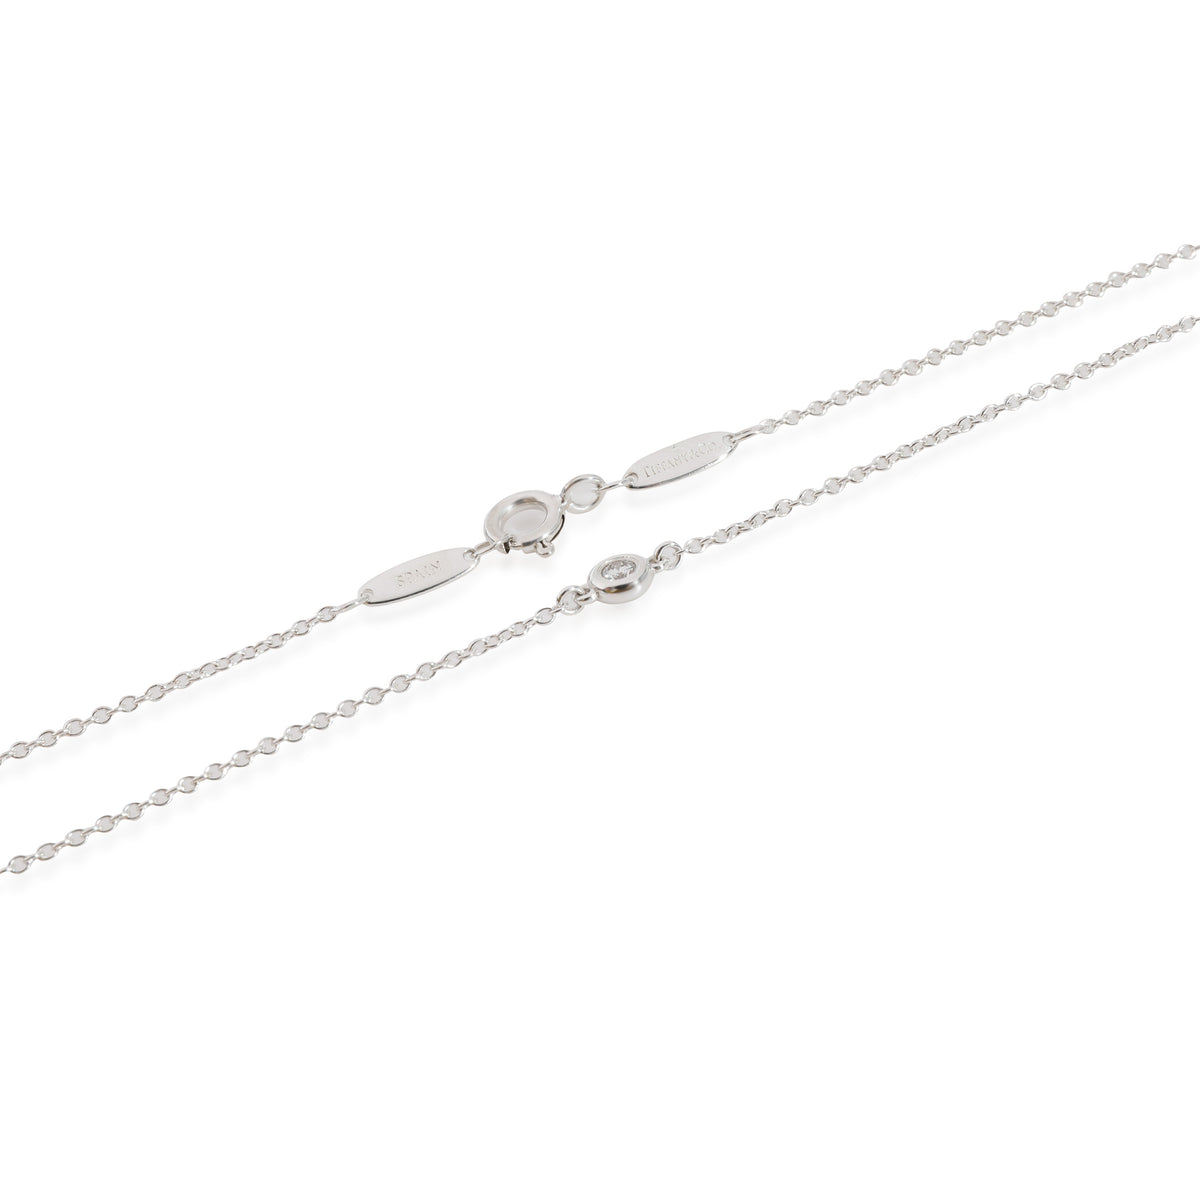 Tiffany Elsa Peretti Diamond by the Yard Necklace in Sterling Silver 0.25 CTW